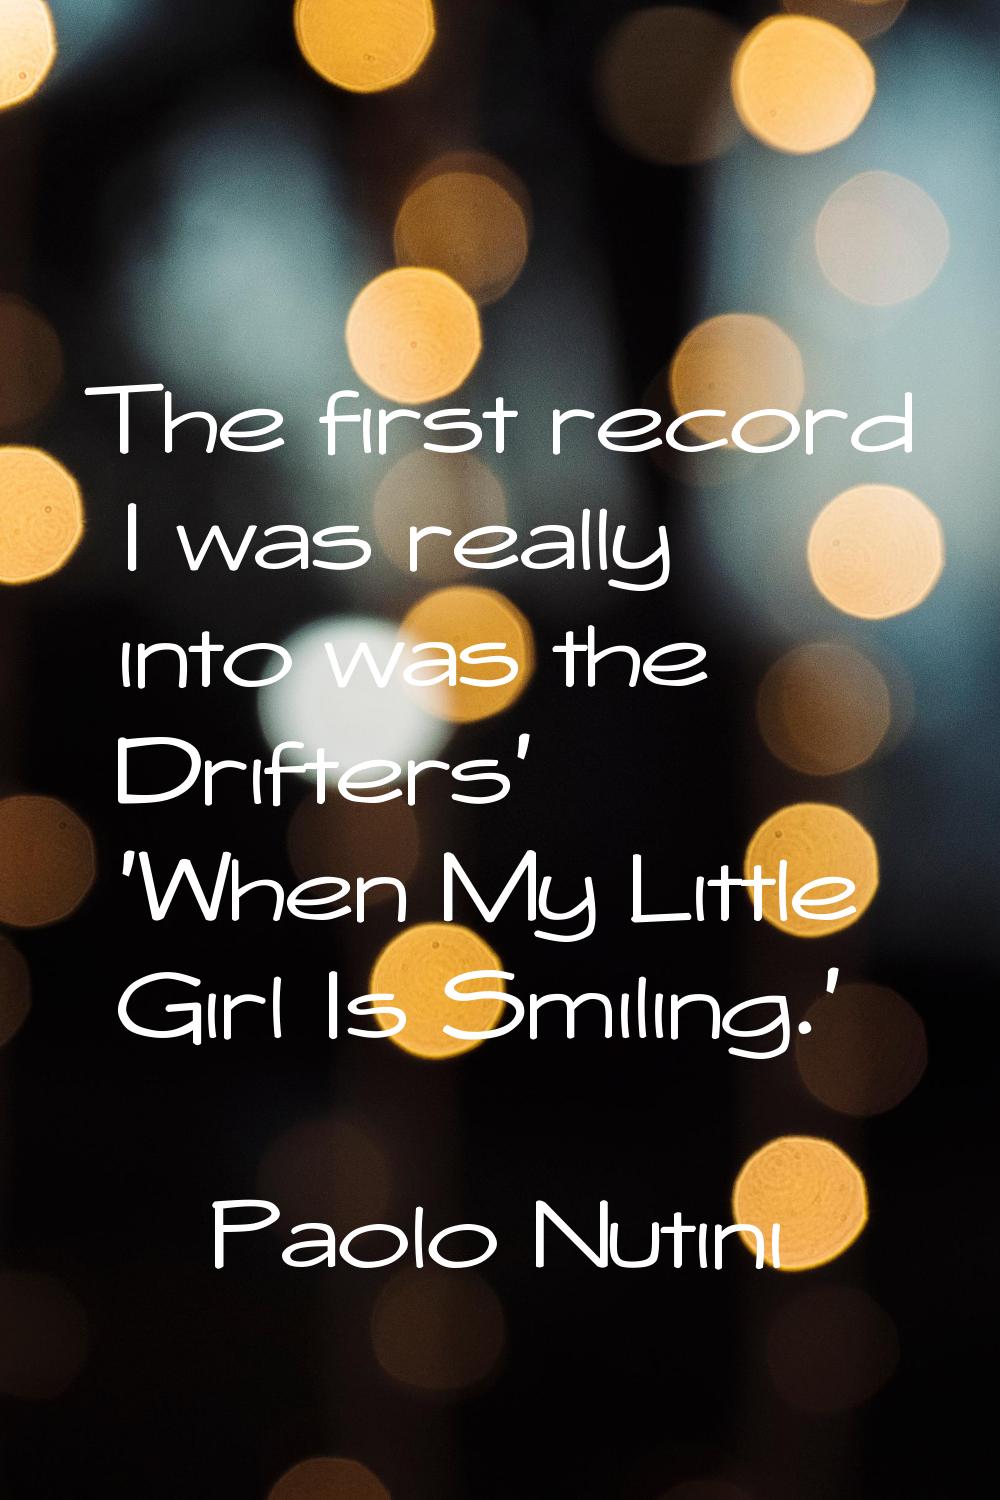 The first record I was really into was the Drifters' 'When My Little Girl Is Smiling.'